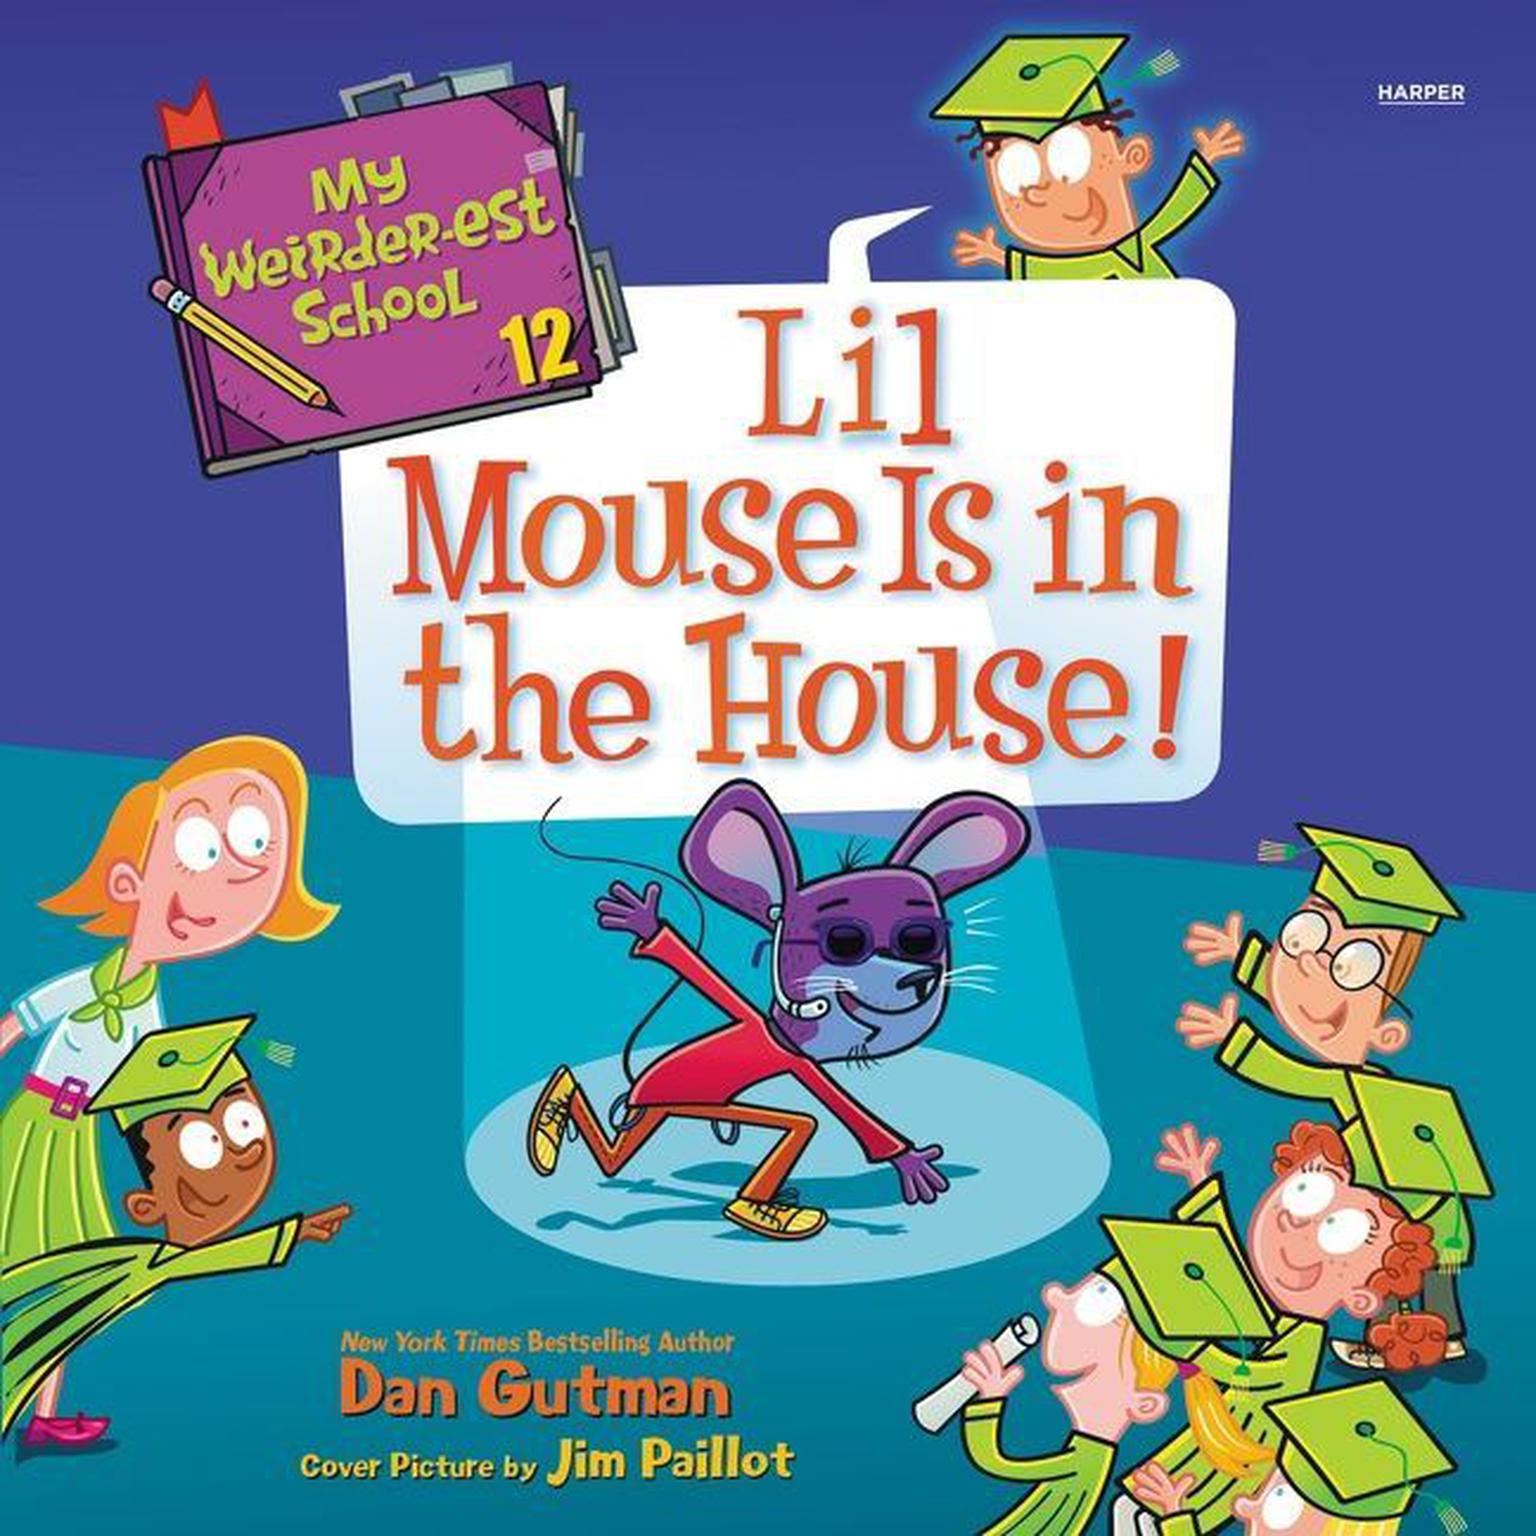 My Weirder-est School #12: Lil Mouse Is in the House! Audiobook, by Dan Gutman